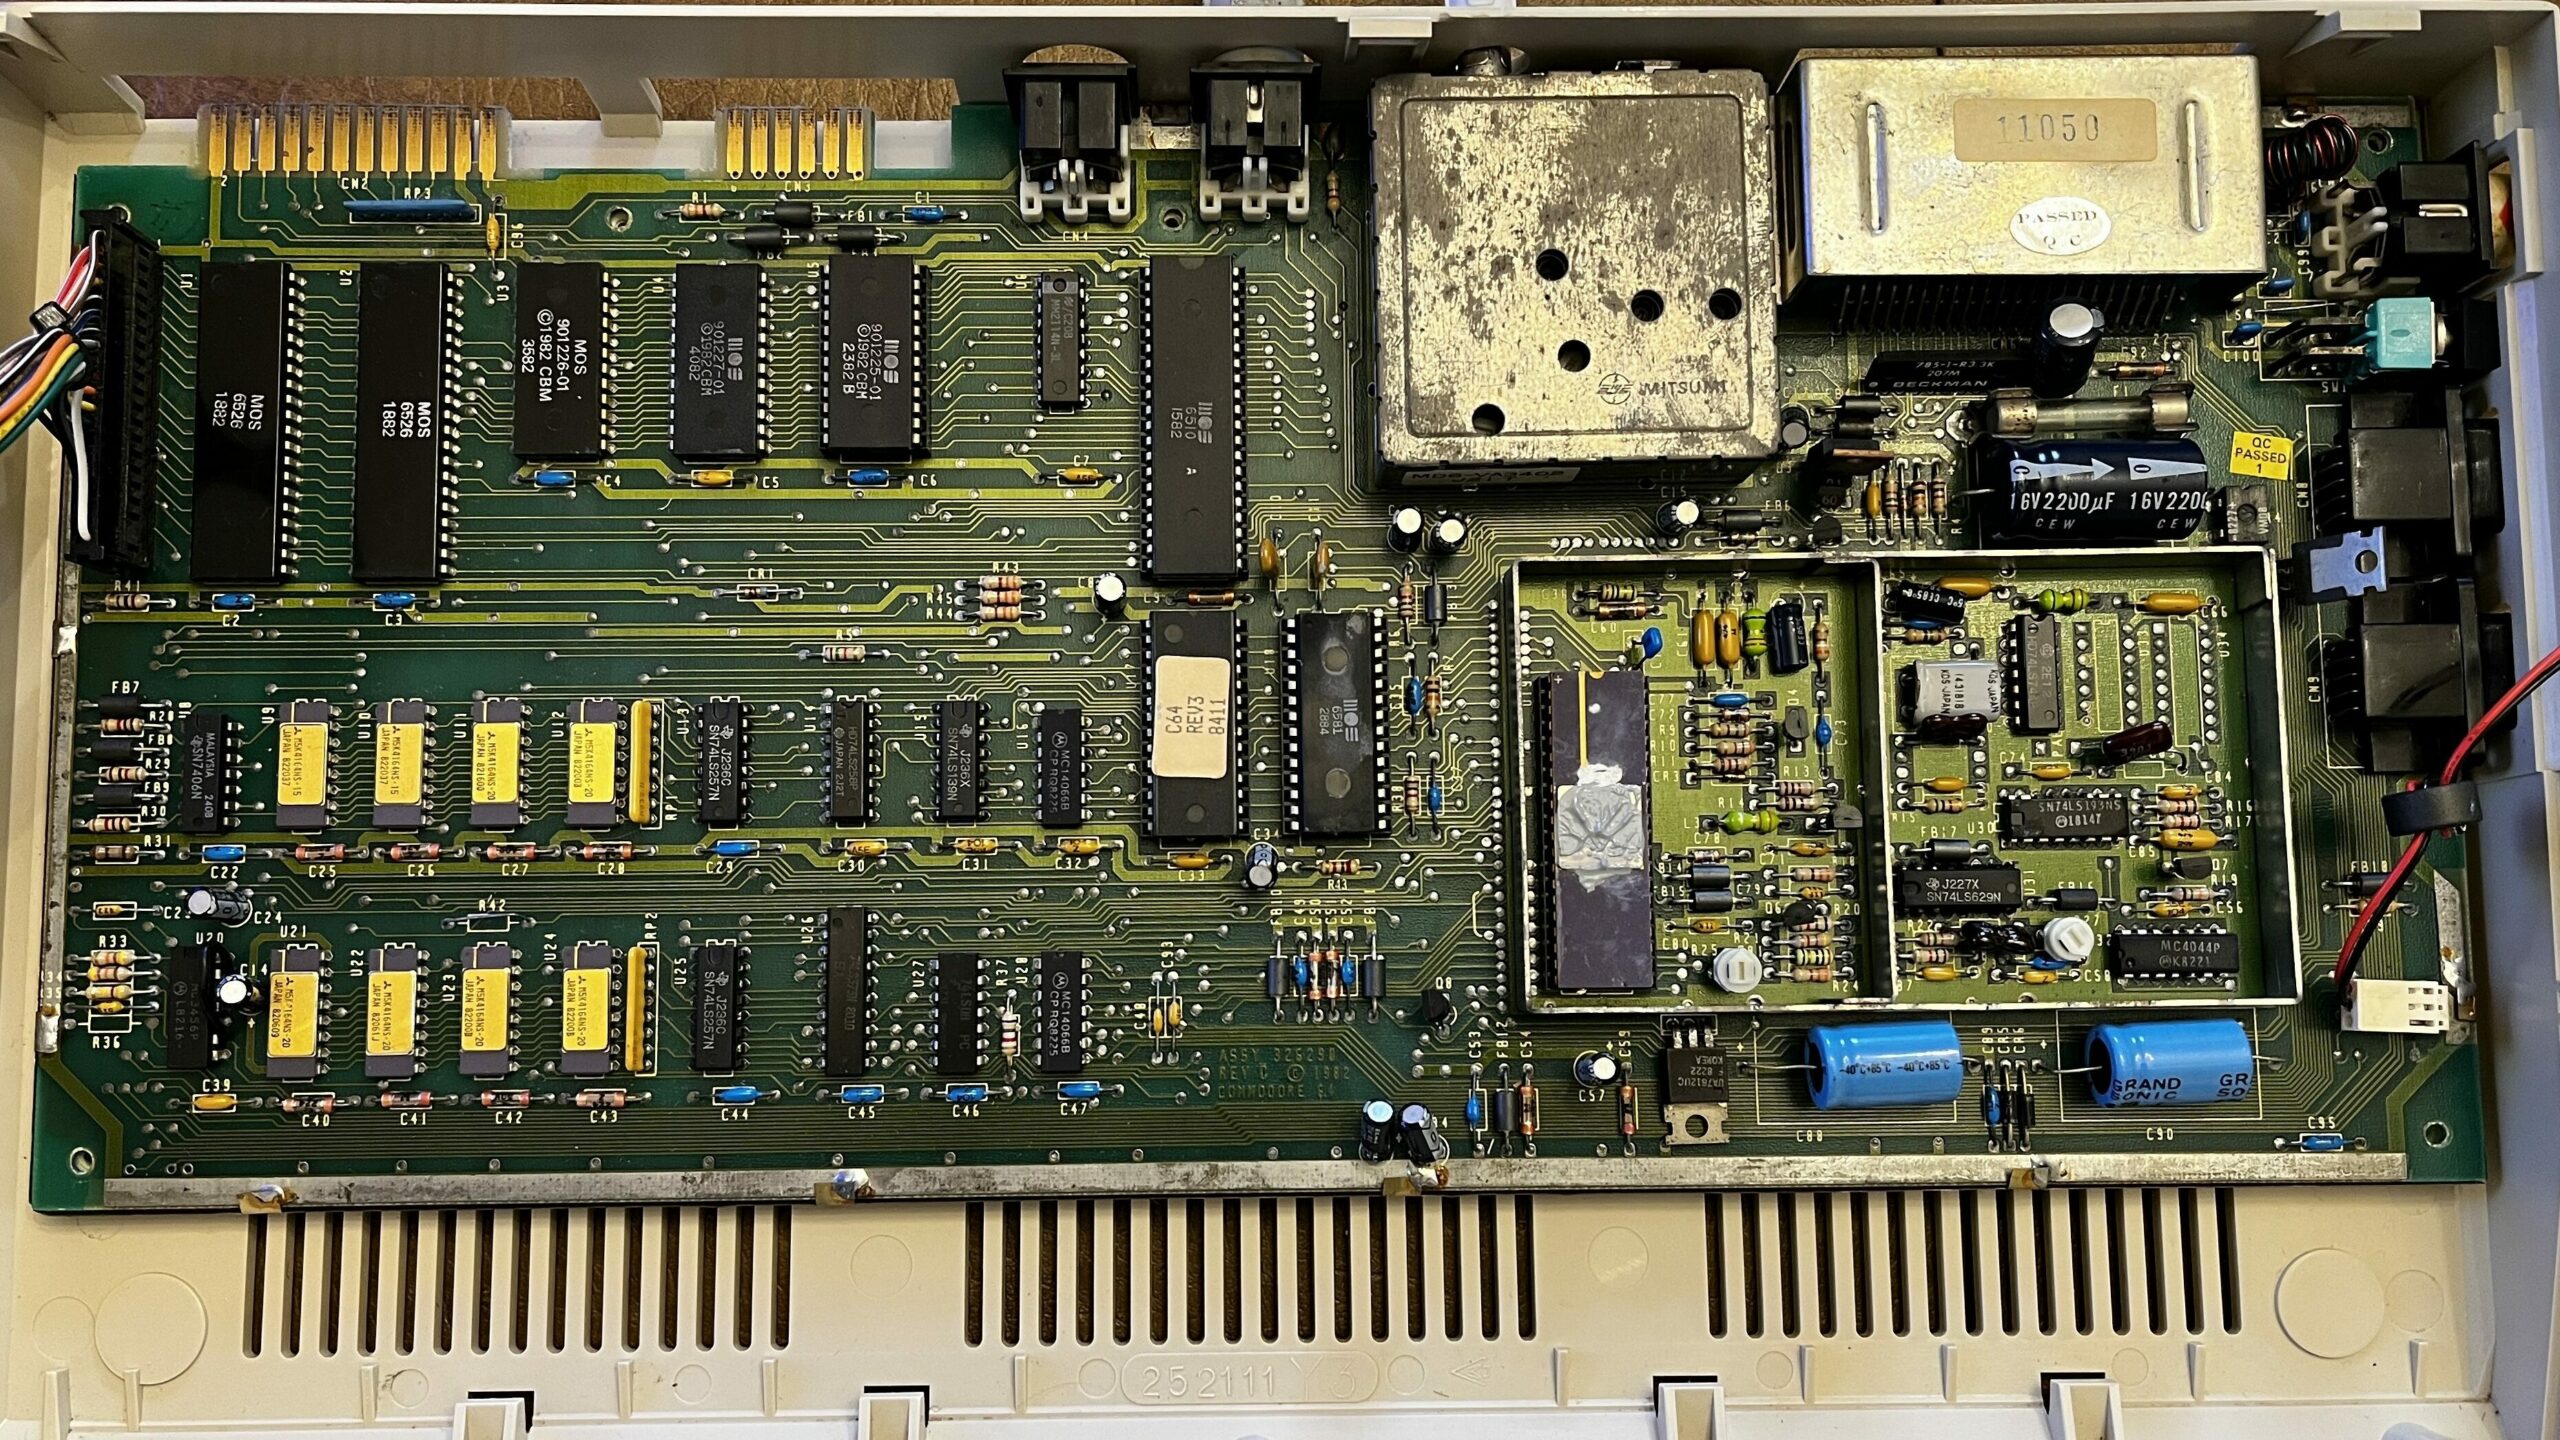 commodore 64 control board showing inside banks of IC chips